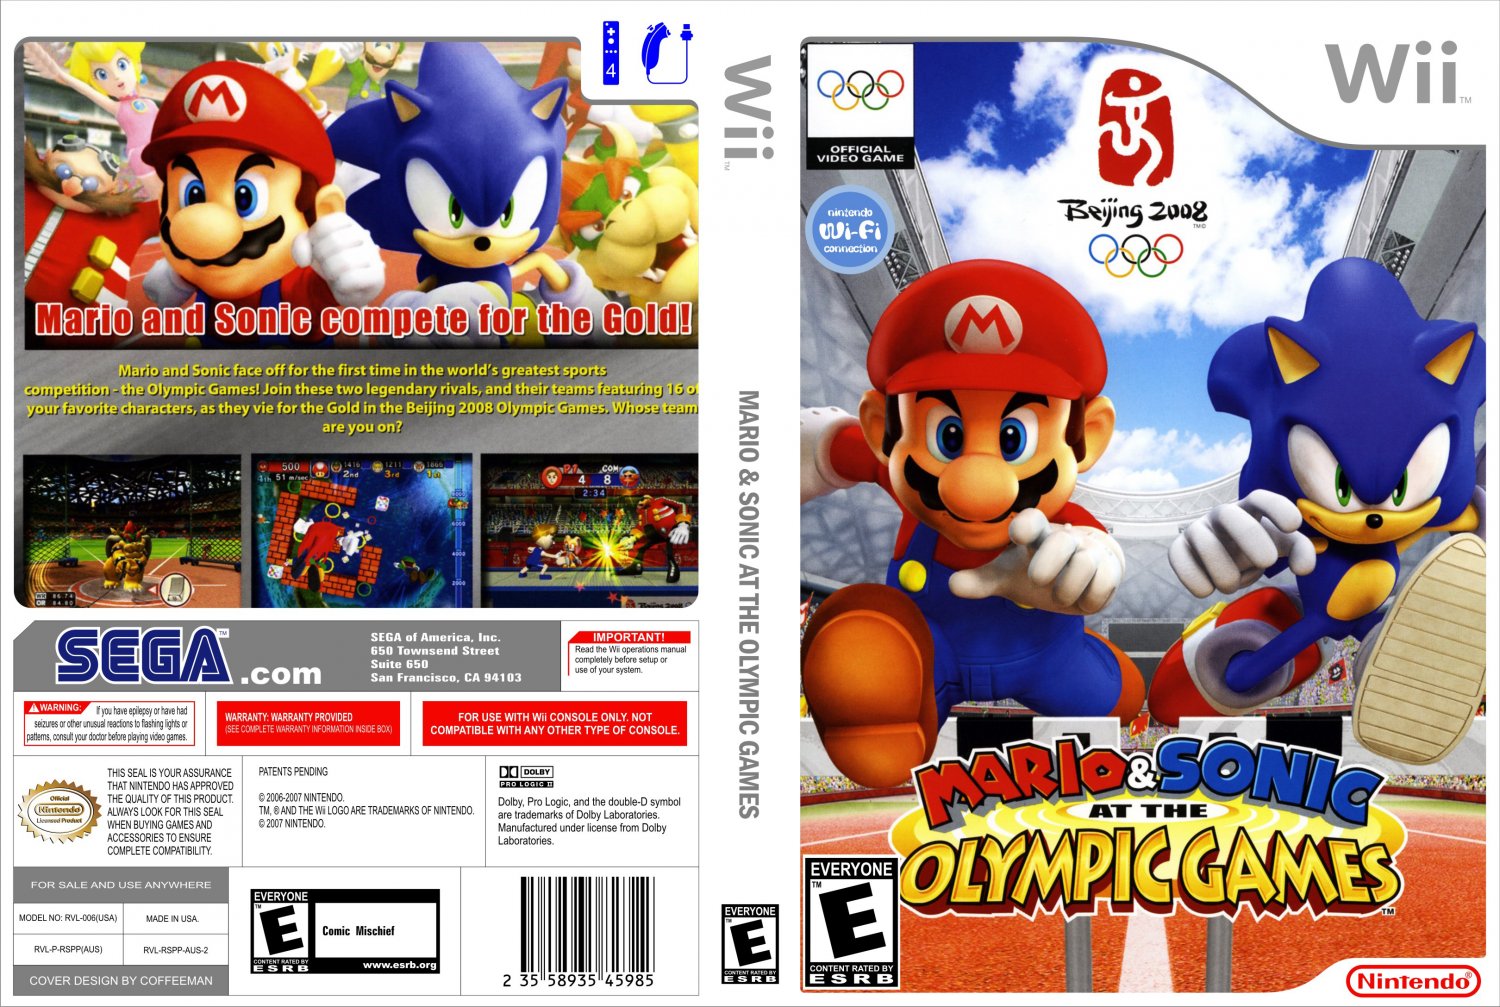 Mario & Sonic at the Olympic Games Nintendo Wii Game Covers Mario